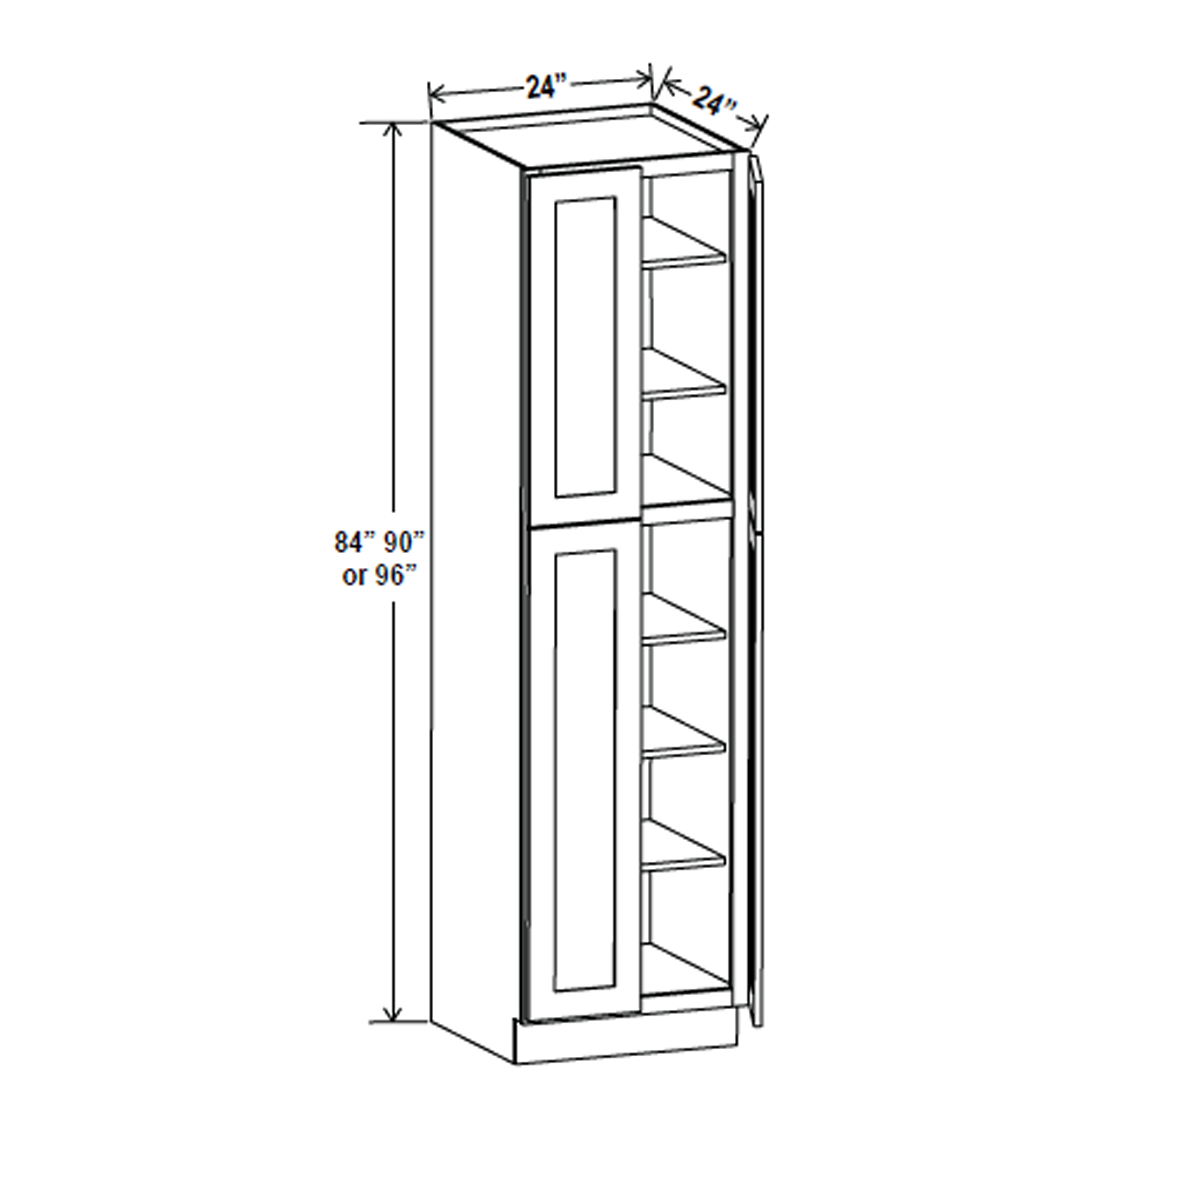 Wall Pantry Cabinet - 24W x 90H x 24D - Aria Shaker Espresso